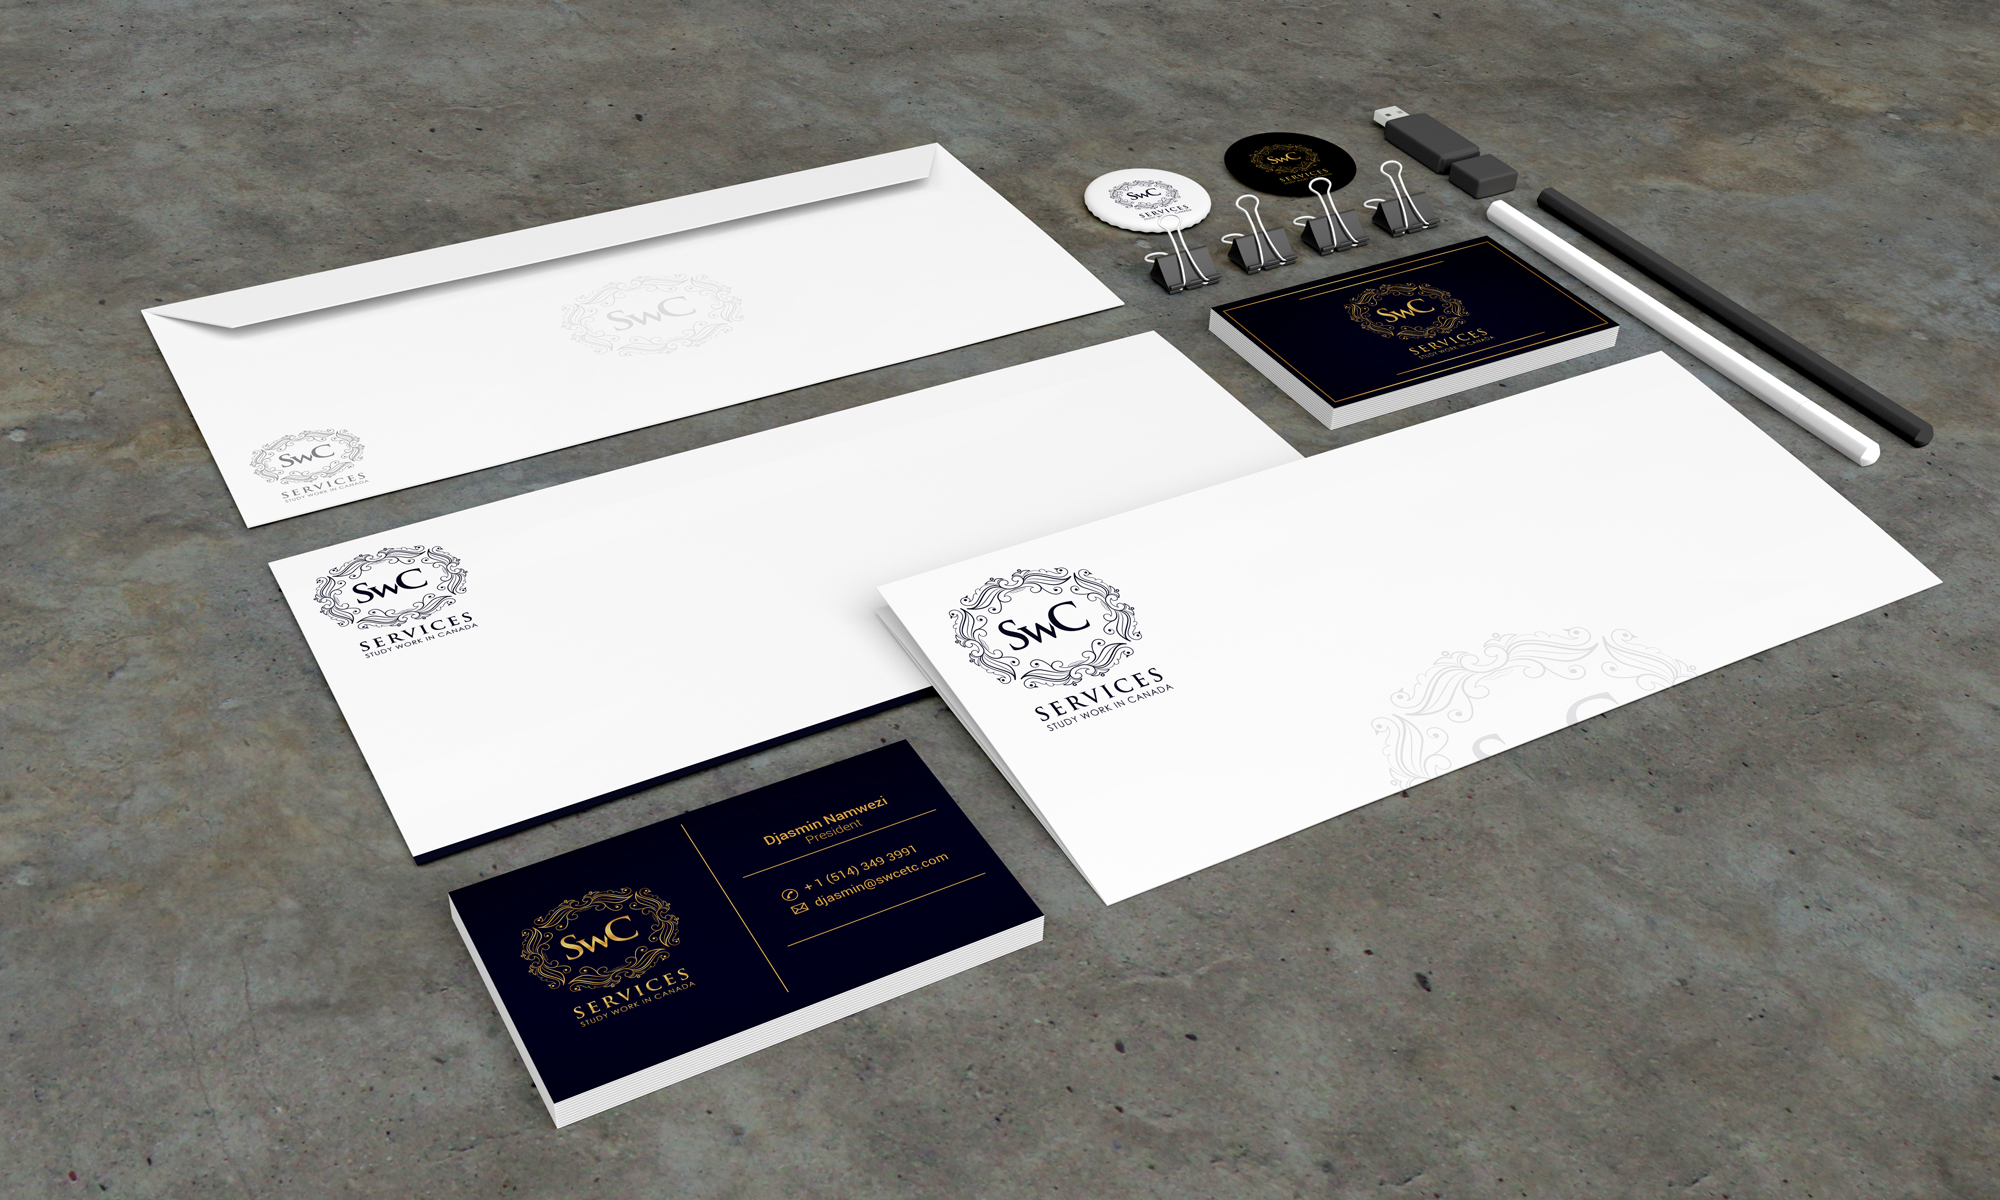 Stationery Design Template for SWC Services - Logo Design Deck